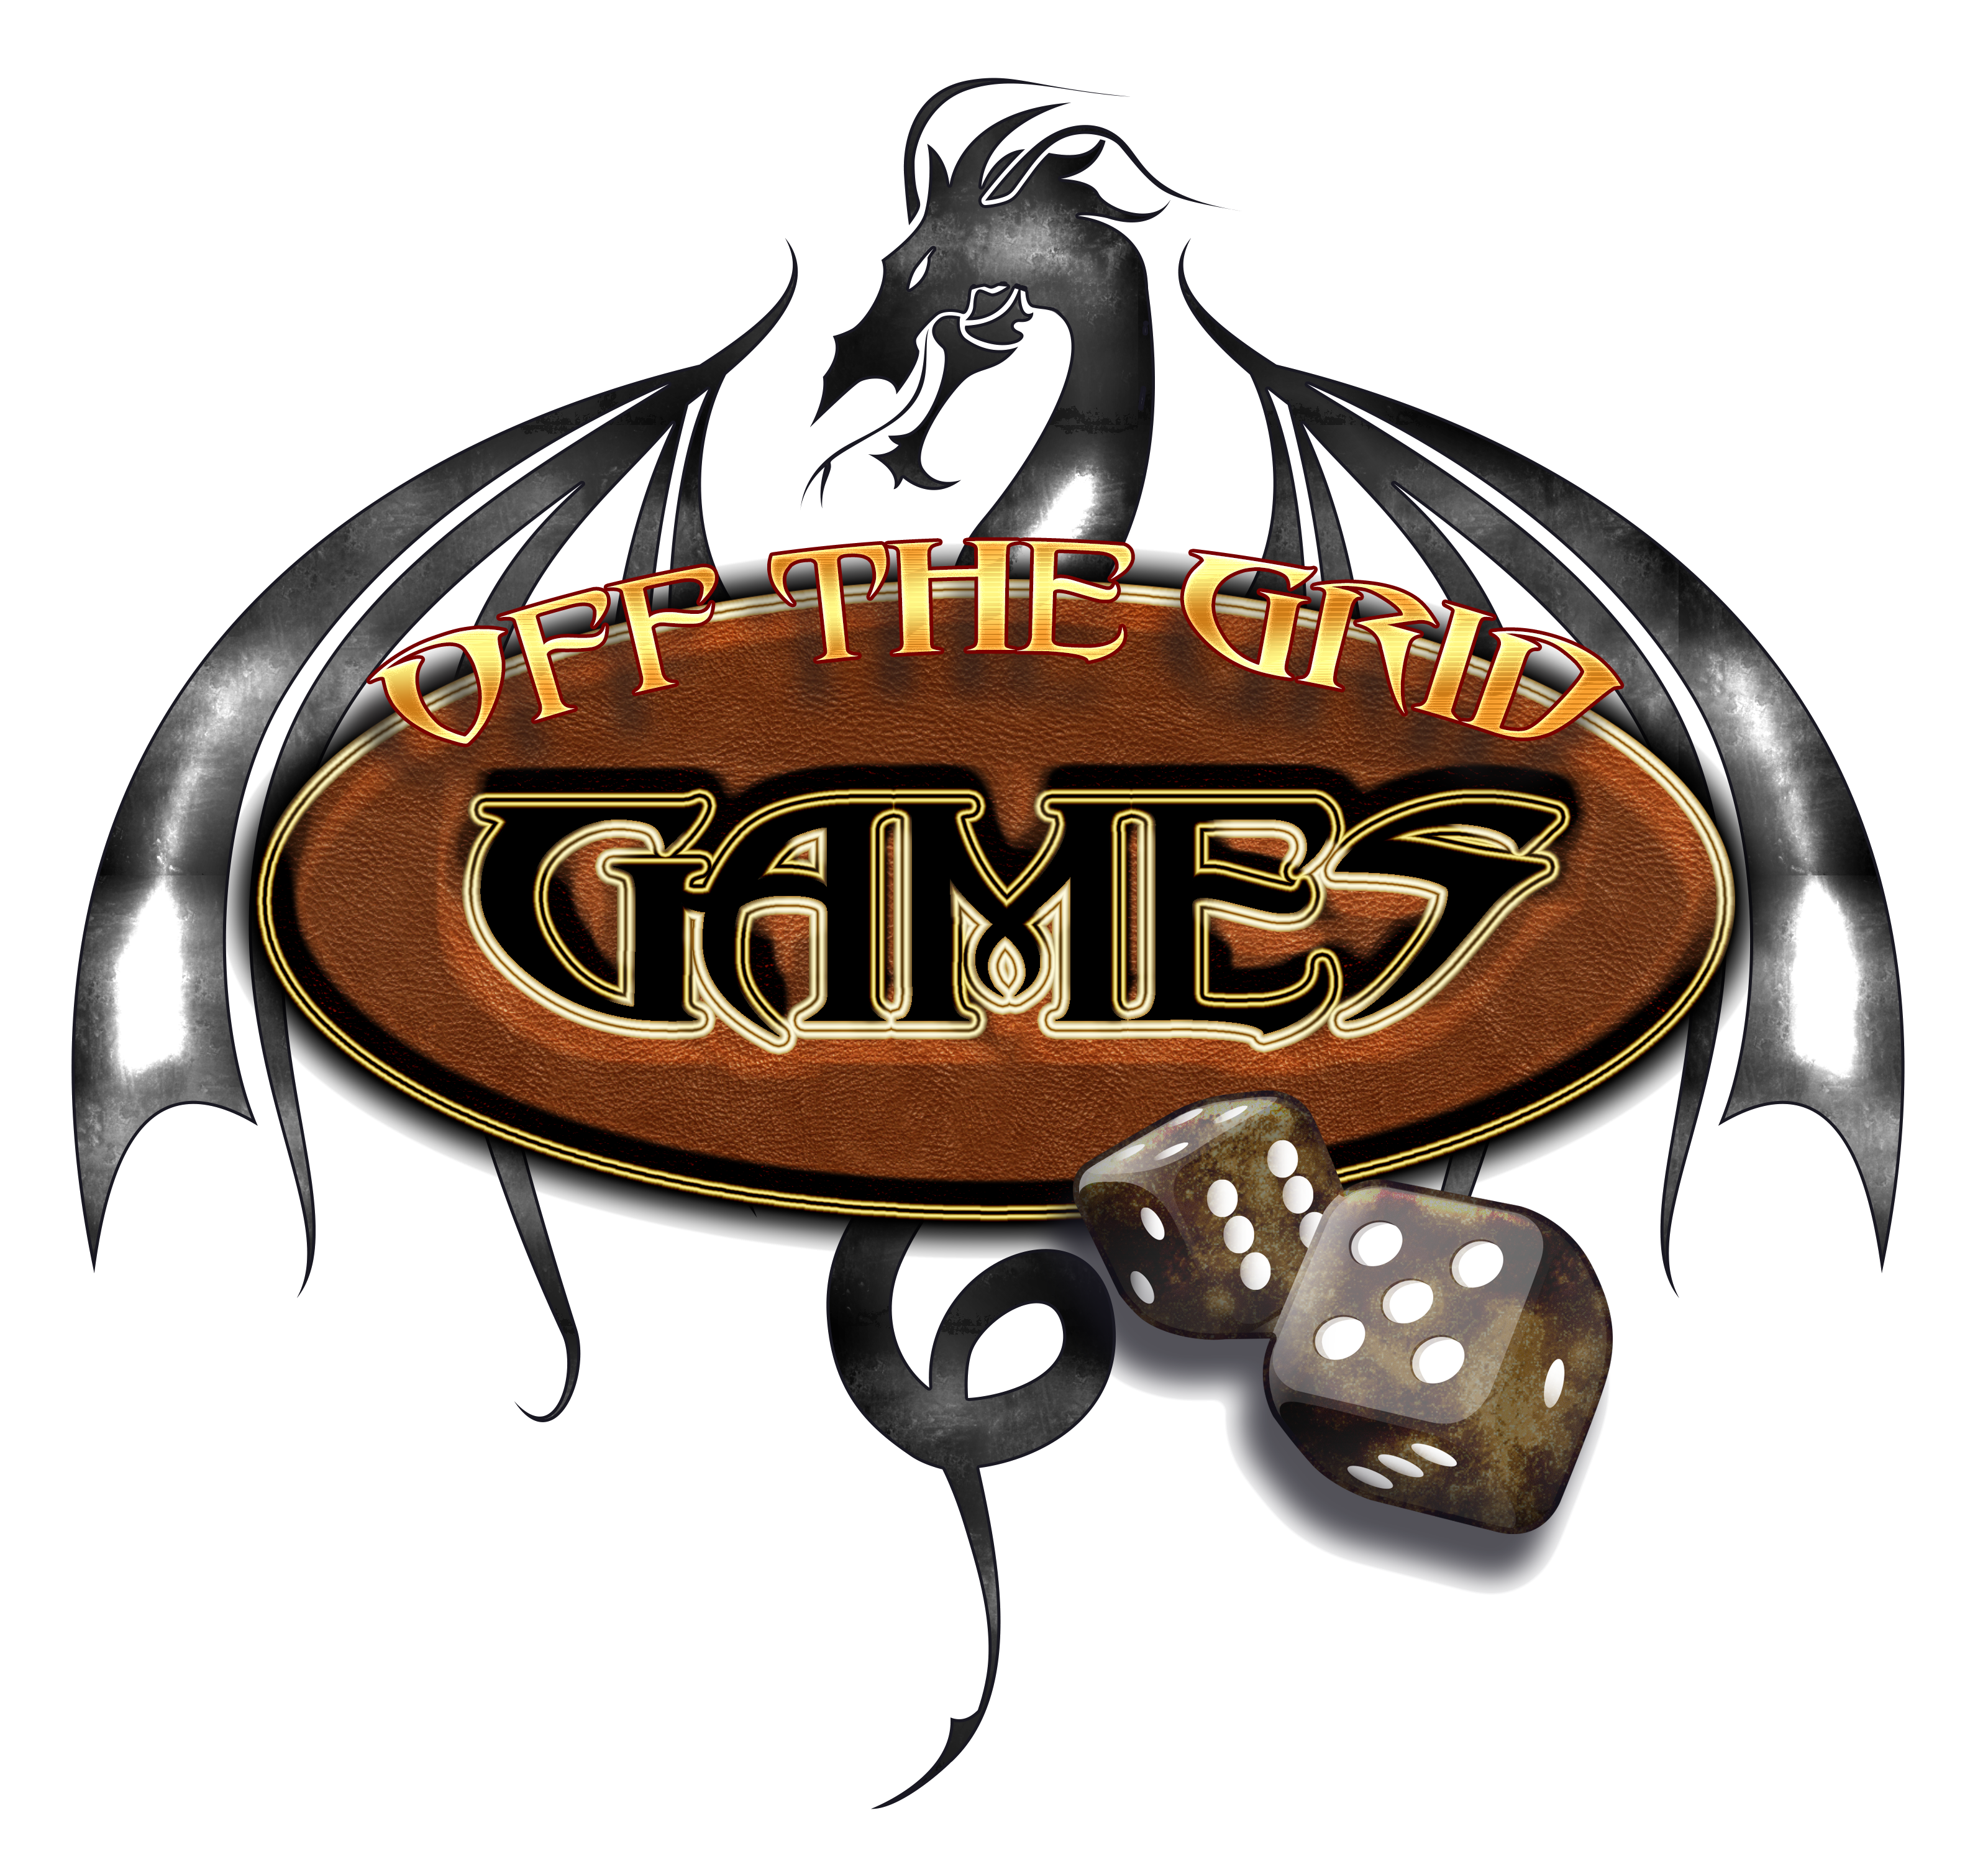 Off The Grid Games